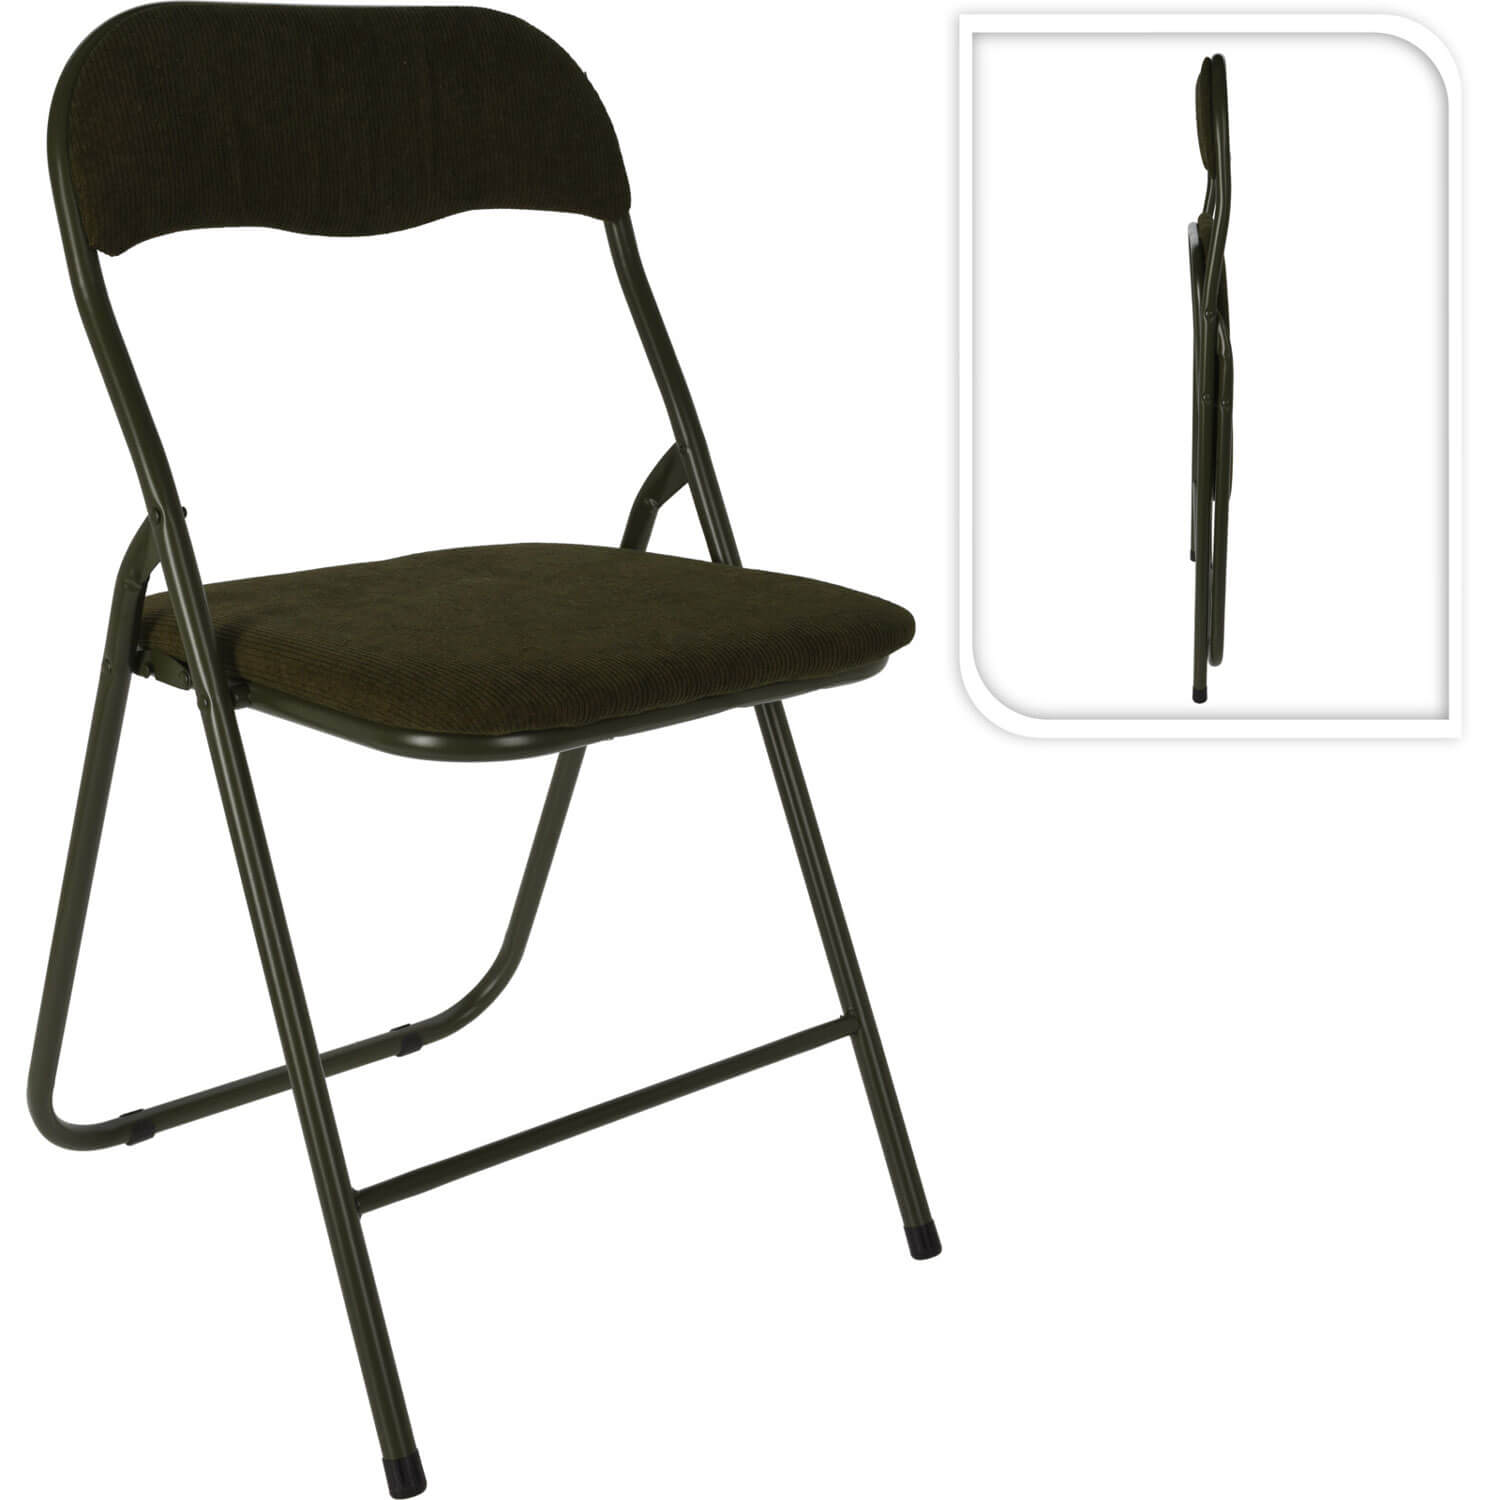 Shaws Department Stores Folding Chair Ribcord Green - Brown 1 Shaws Department Stores